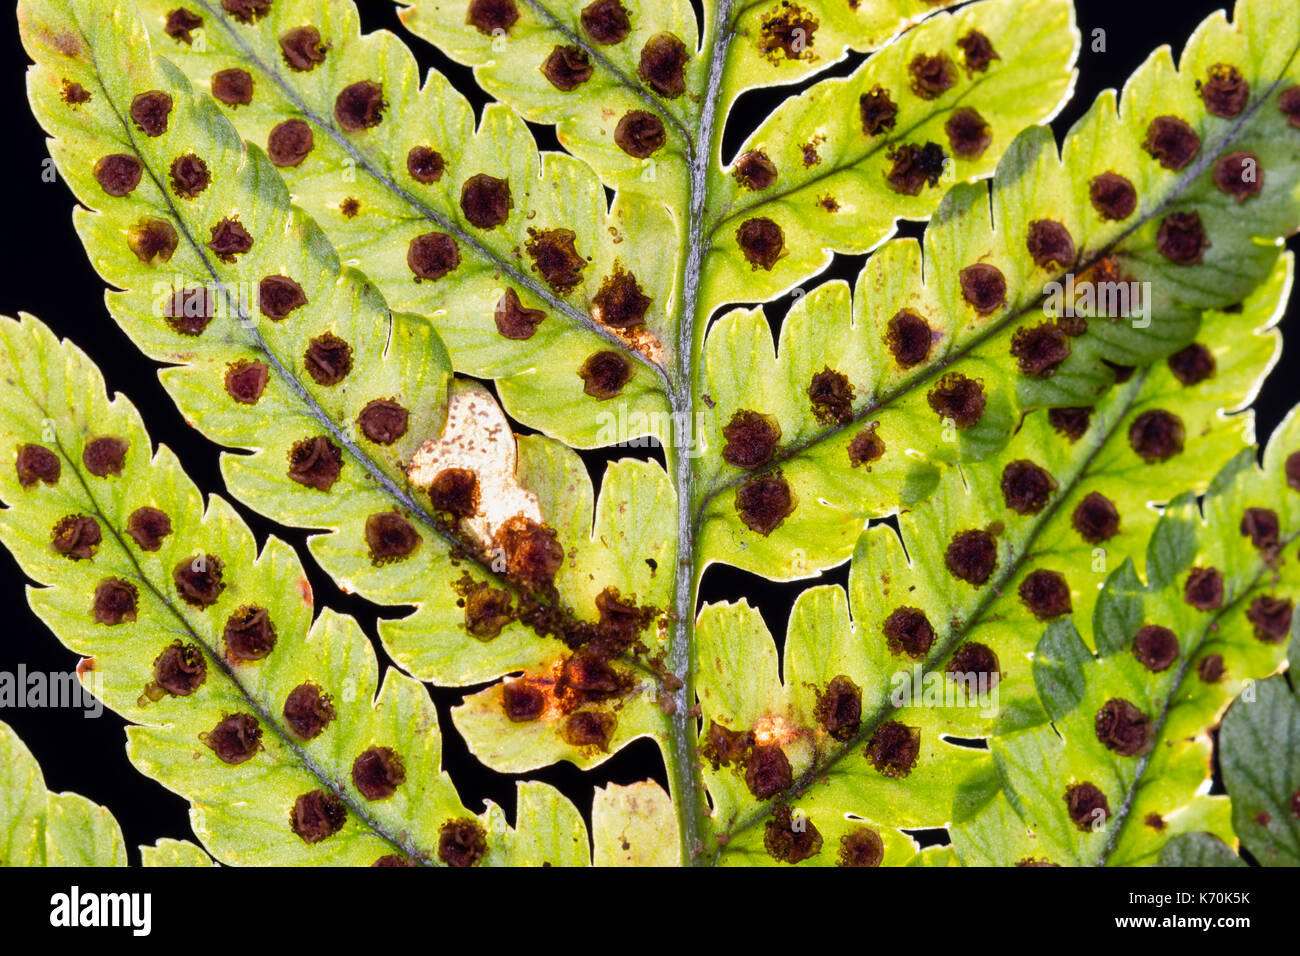 Spores in the sporangia on the underside of the fronds of Dryopteris erythrosora, a hardy evergreen fern Stock Photo